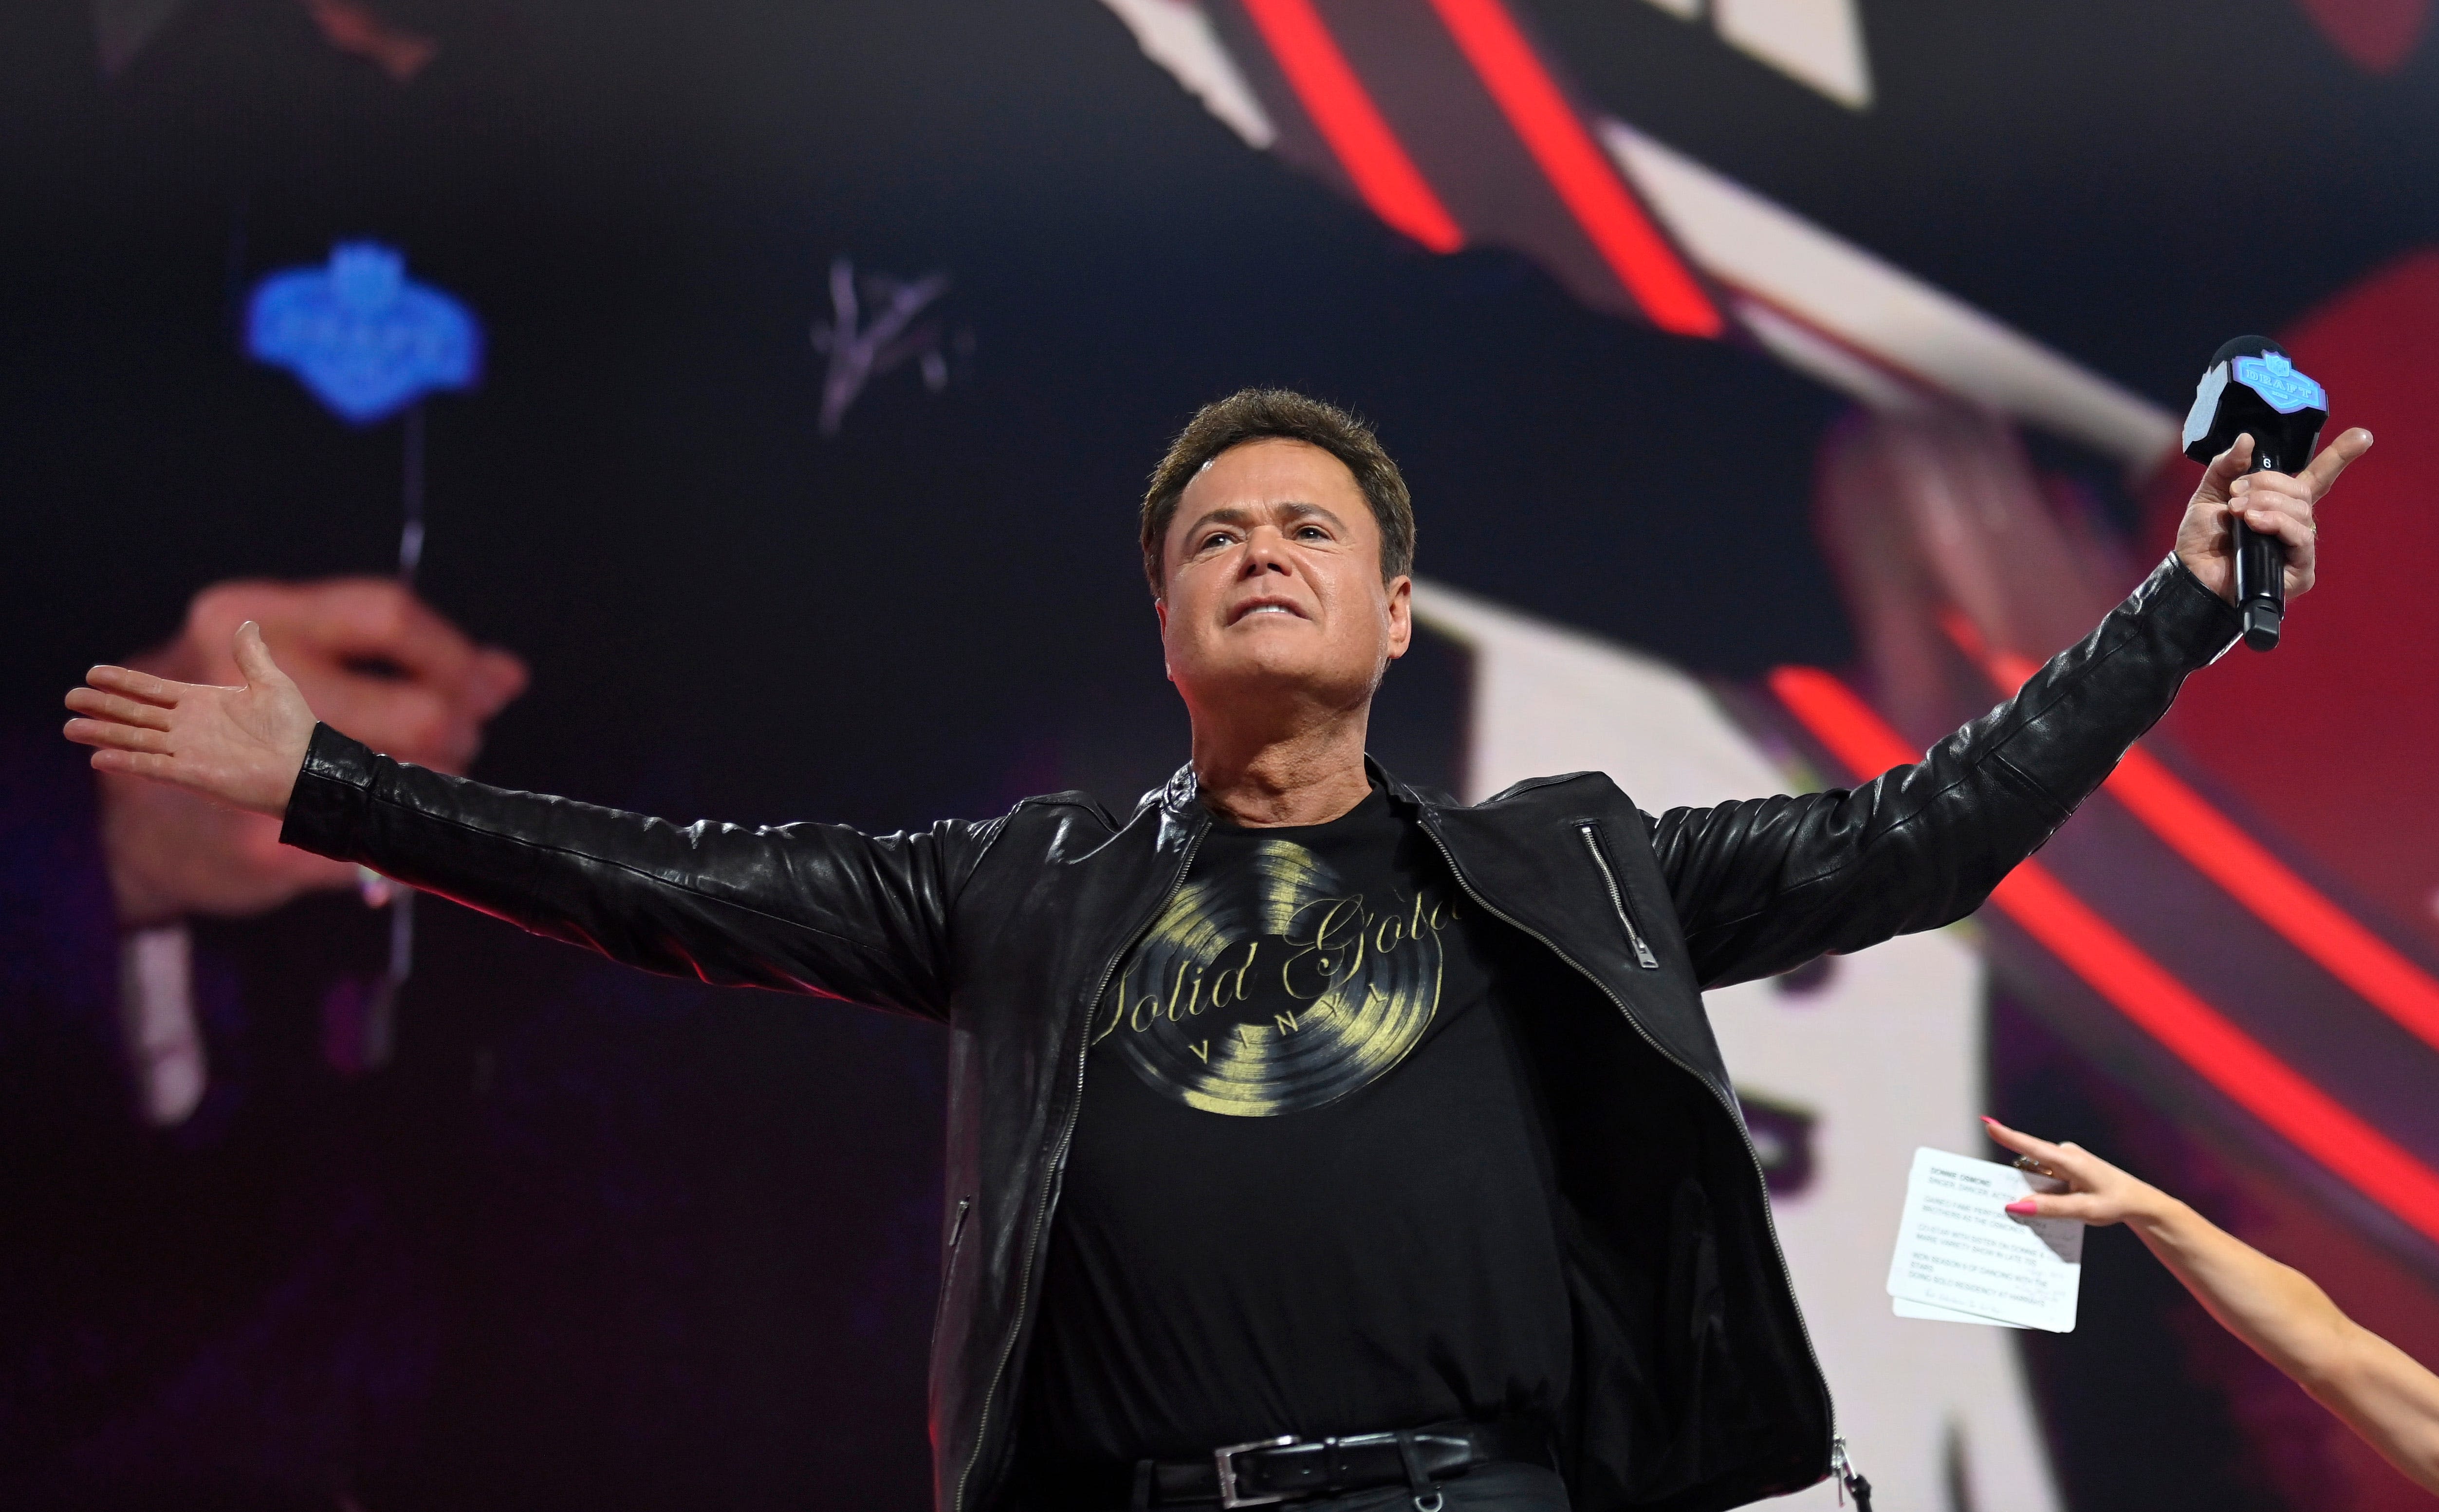 Donny Osmond hits all the right notes as he hits the Beacon Theatre in NY